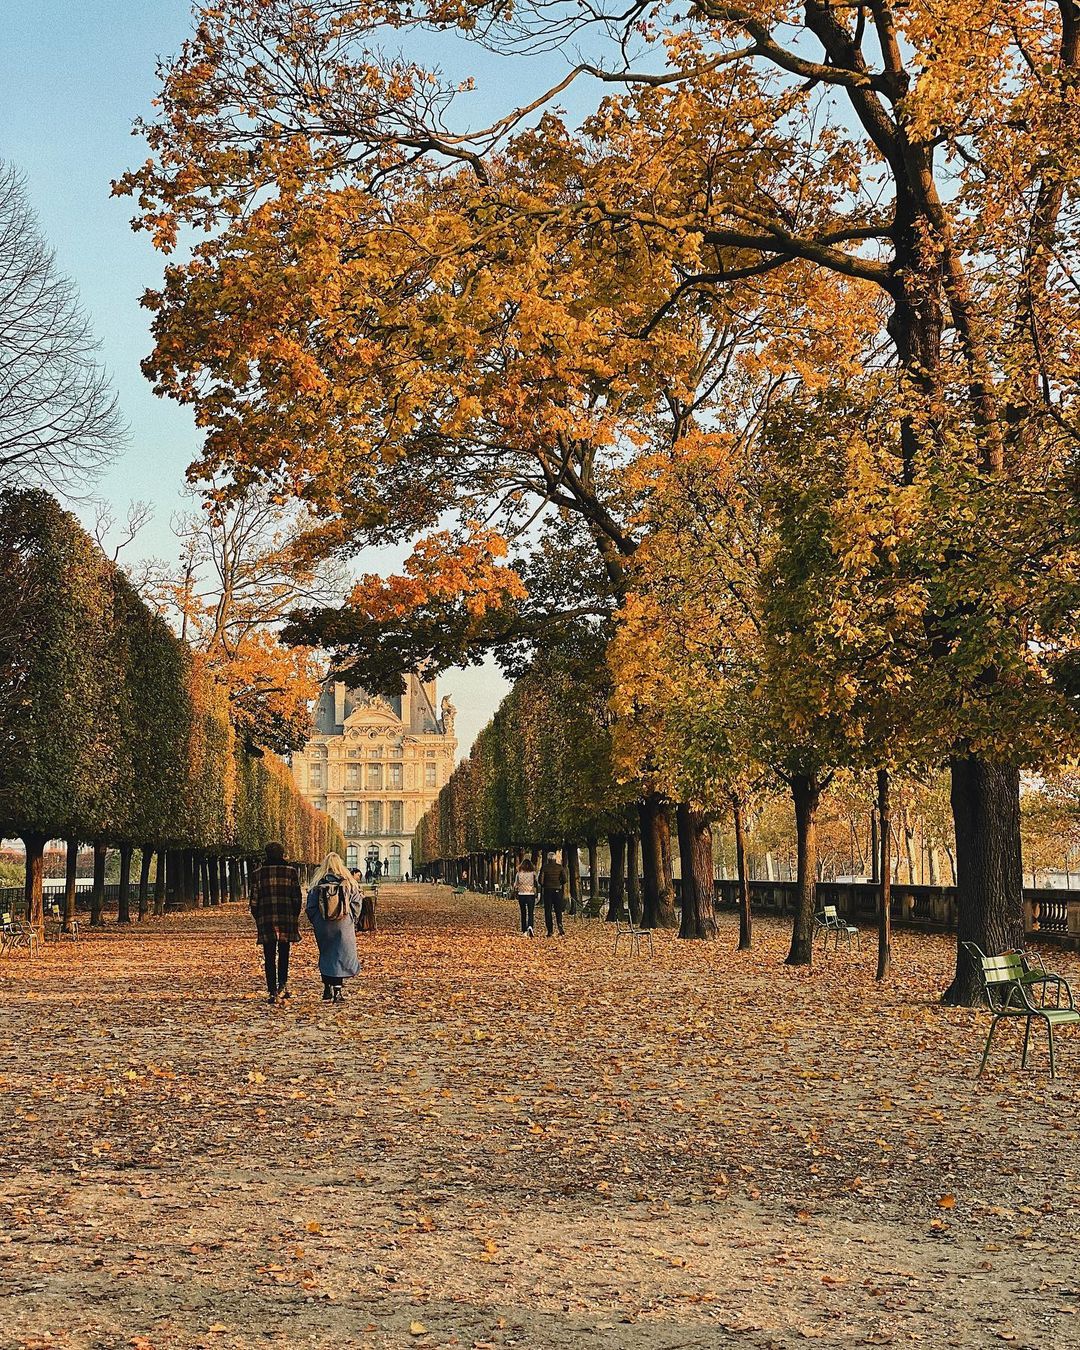 Jardin des Tuileries covered in autumn leaves